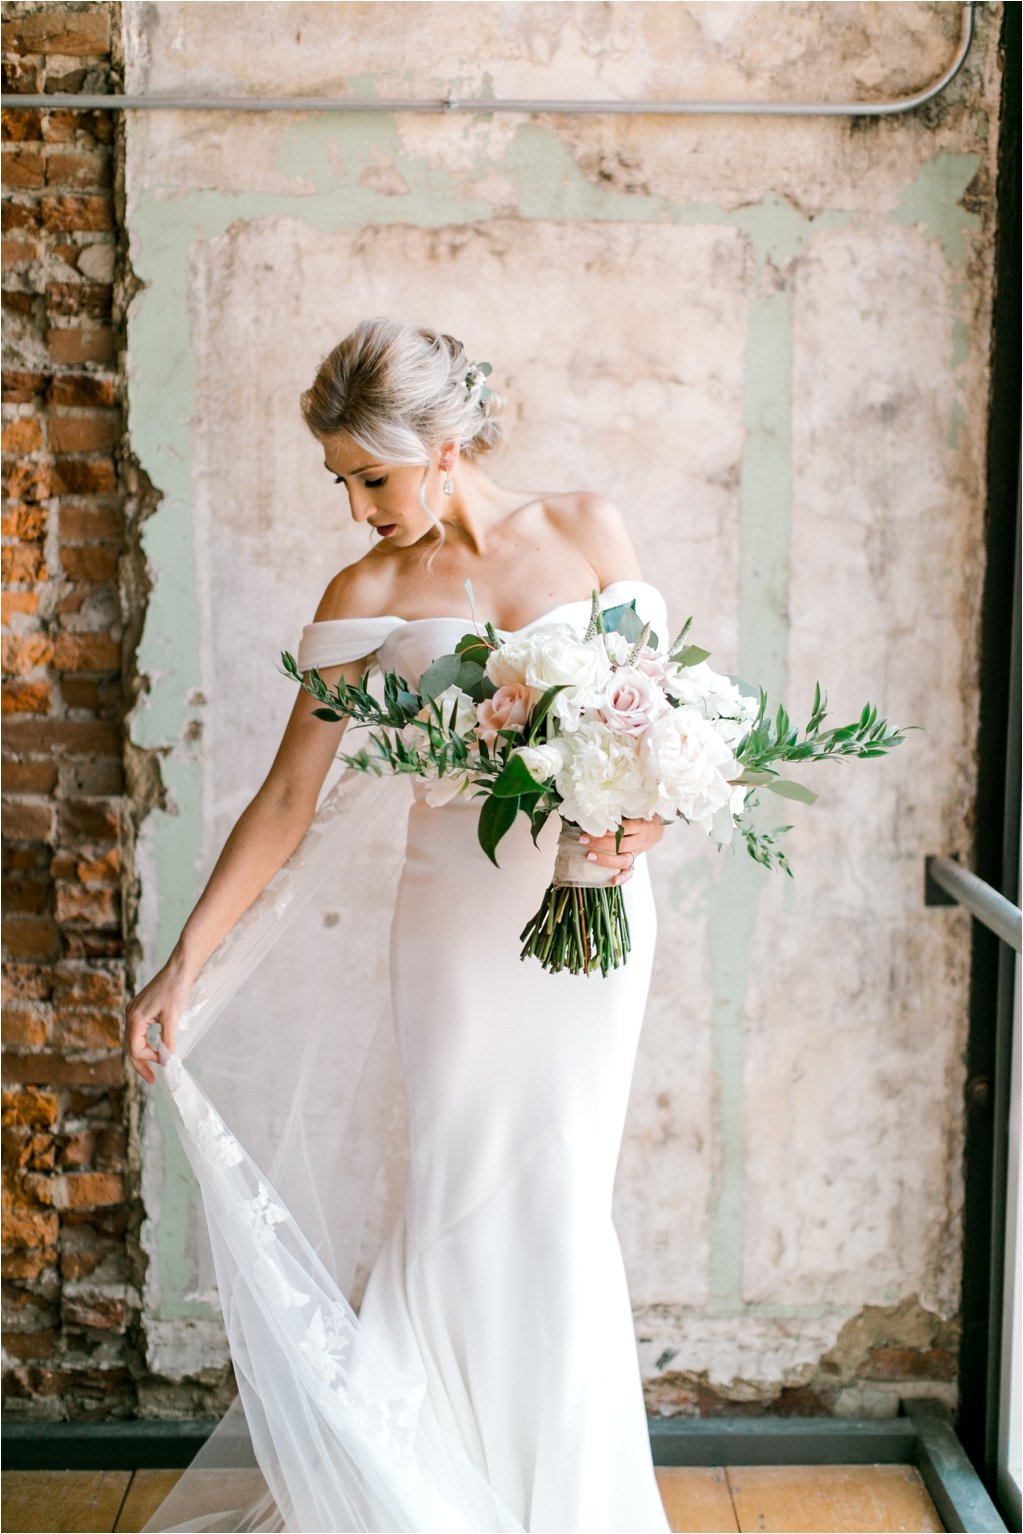 Bride holding dress and large white bouquet